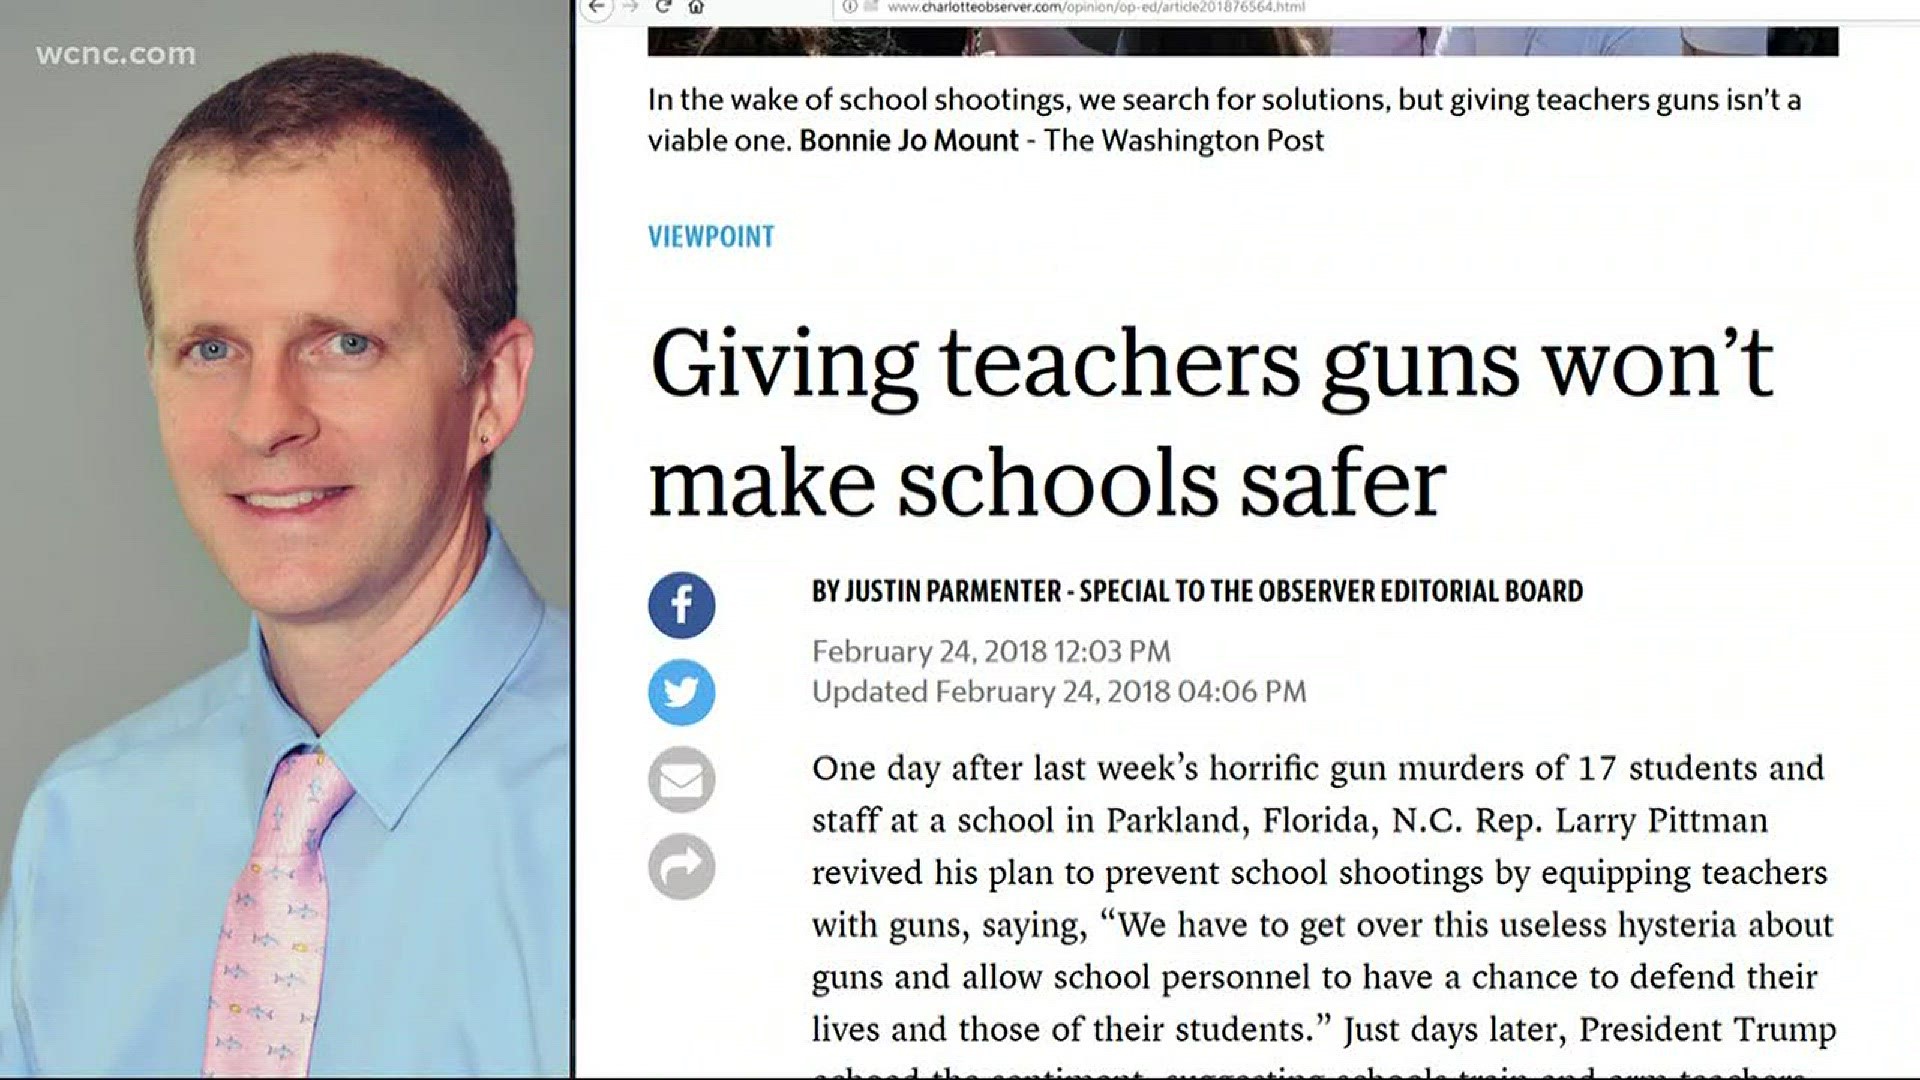 A Charlotte teacher is making national headlines after an op-ed he wrote about arming teachers prompted a mean-spirited email from a stranger.